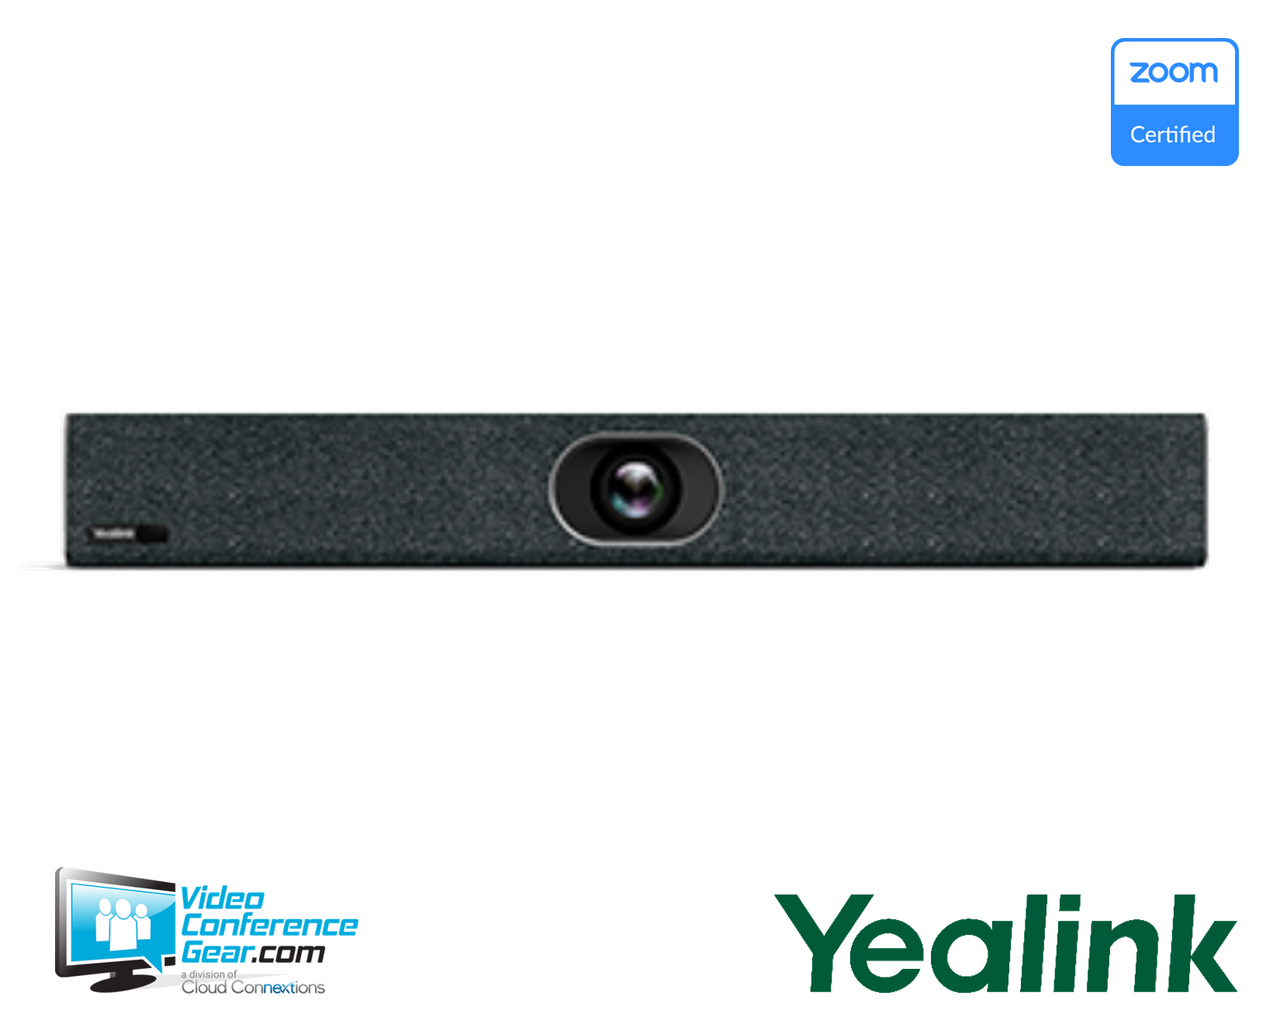 Yealink MeetingBar A20 Zoom Rooms Solution with All-in-One Android Collaboration Videobar and CTP18 Room Controller for Small Rooms